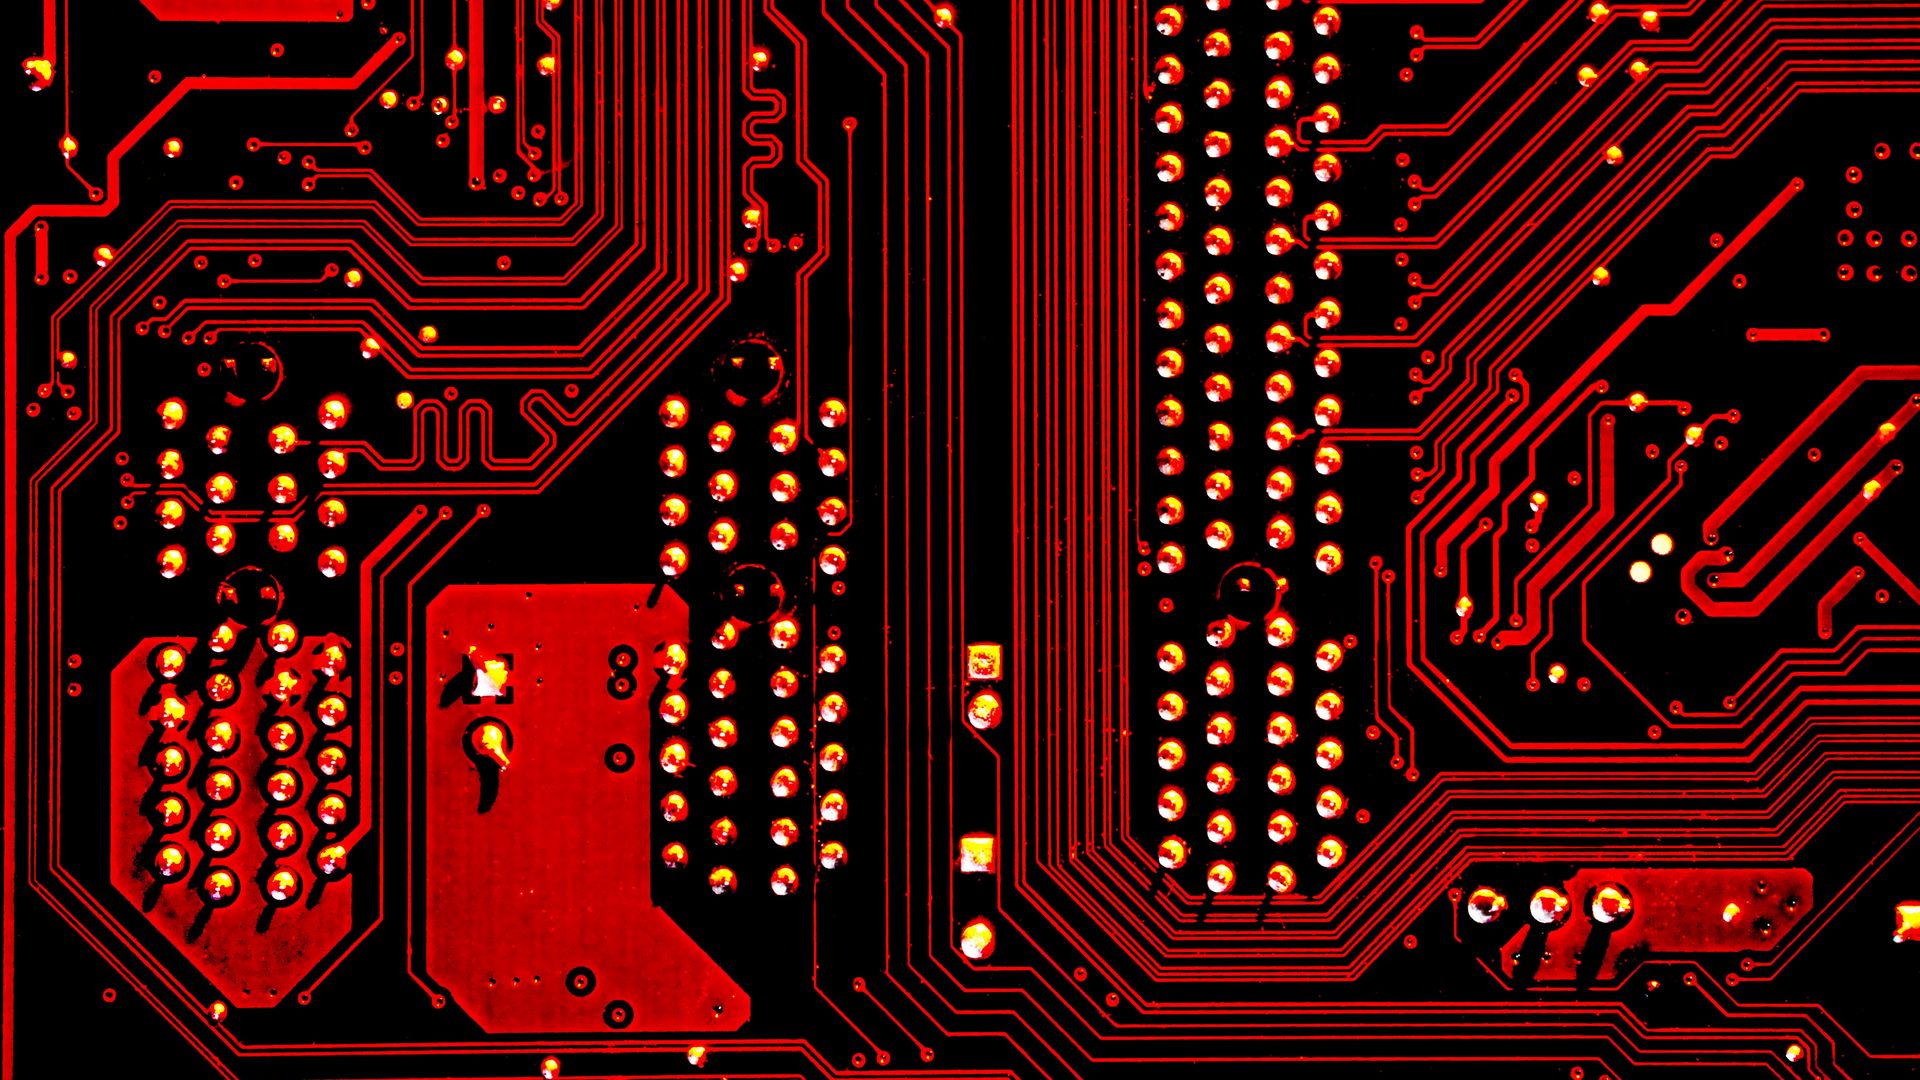 Download wallpaper 1920x1080 motherboard, detail, computer, circuit full hd, hdtv, fhd, 1080p HD background